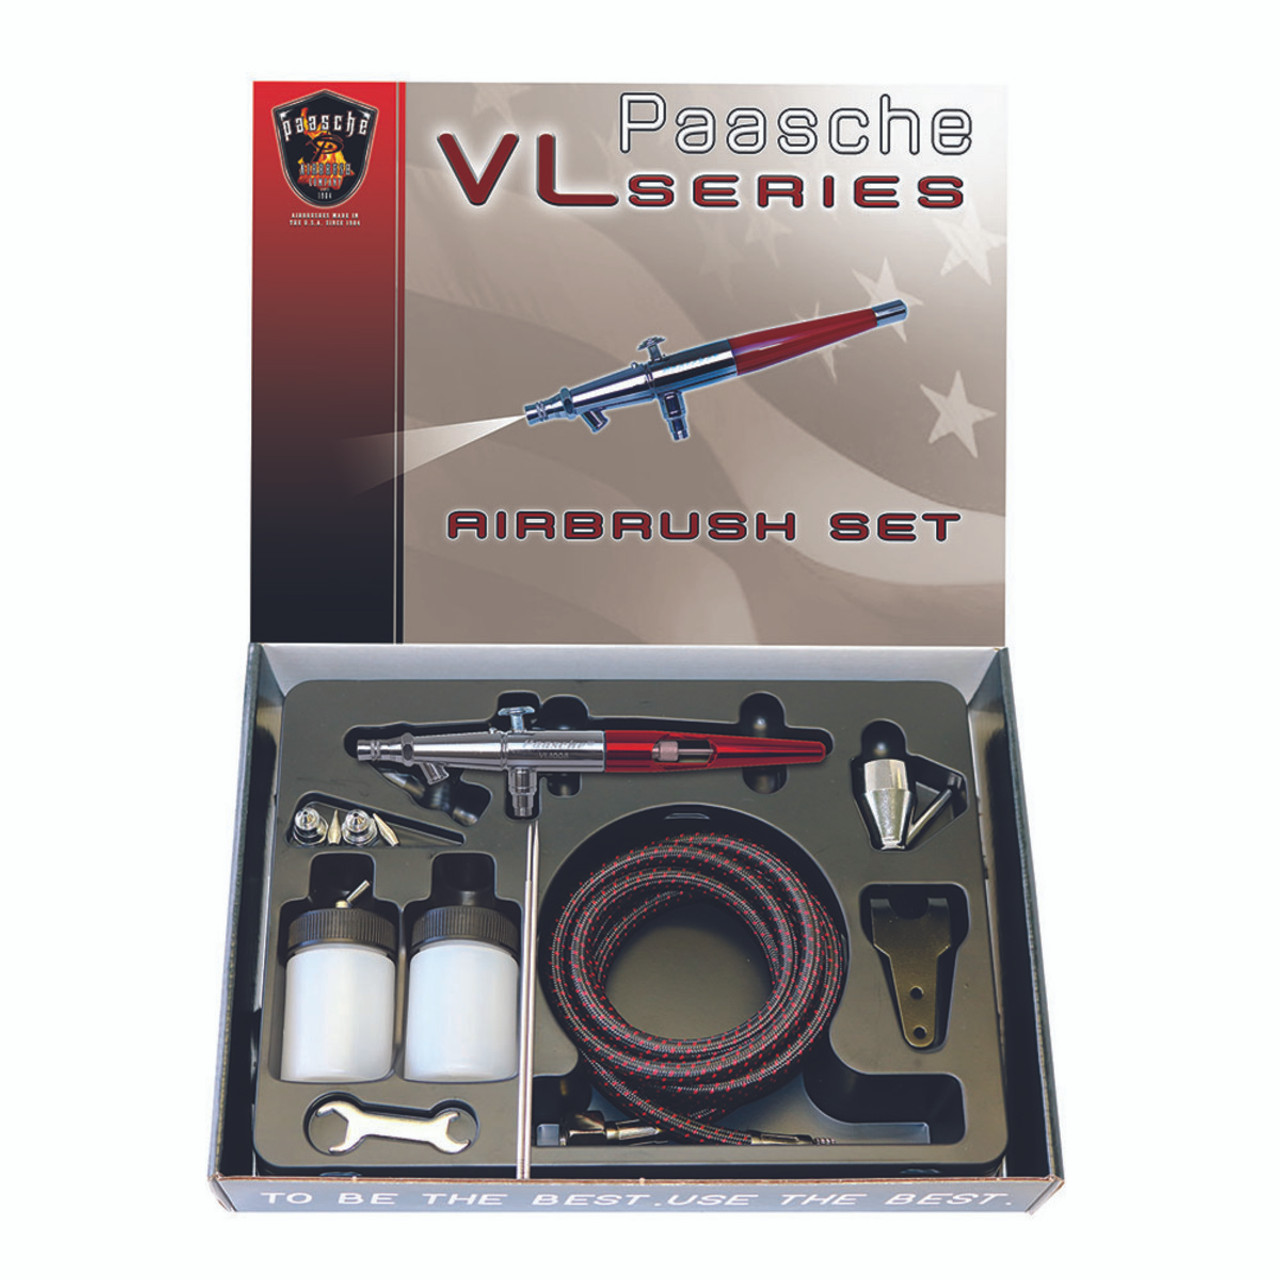 Paasche VL-3MH (Formerly VL-202S) Airbrush Kit w/Metal Handle and All 3 Heads